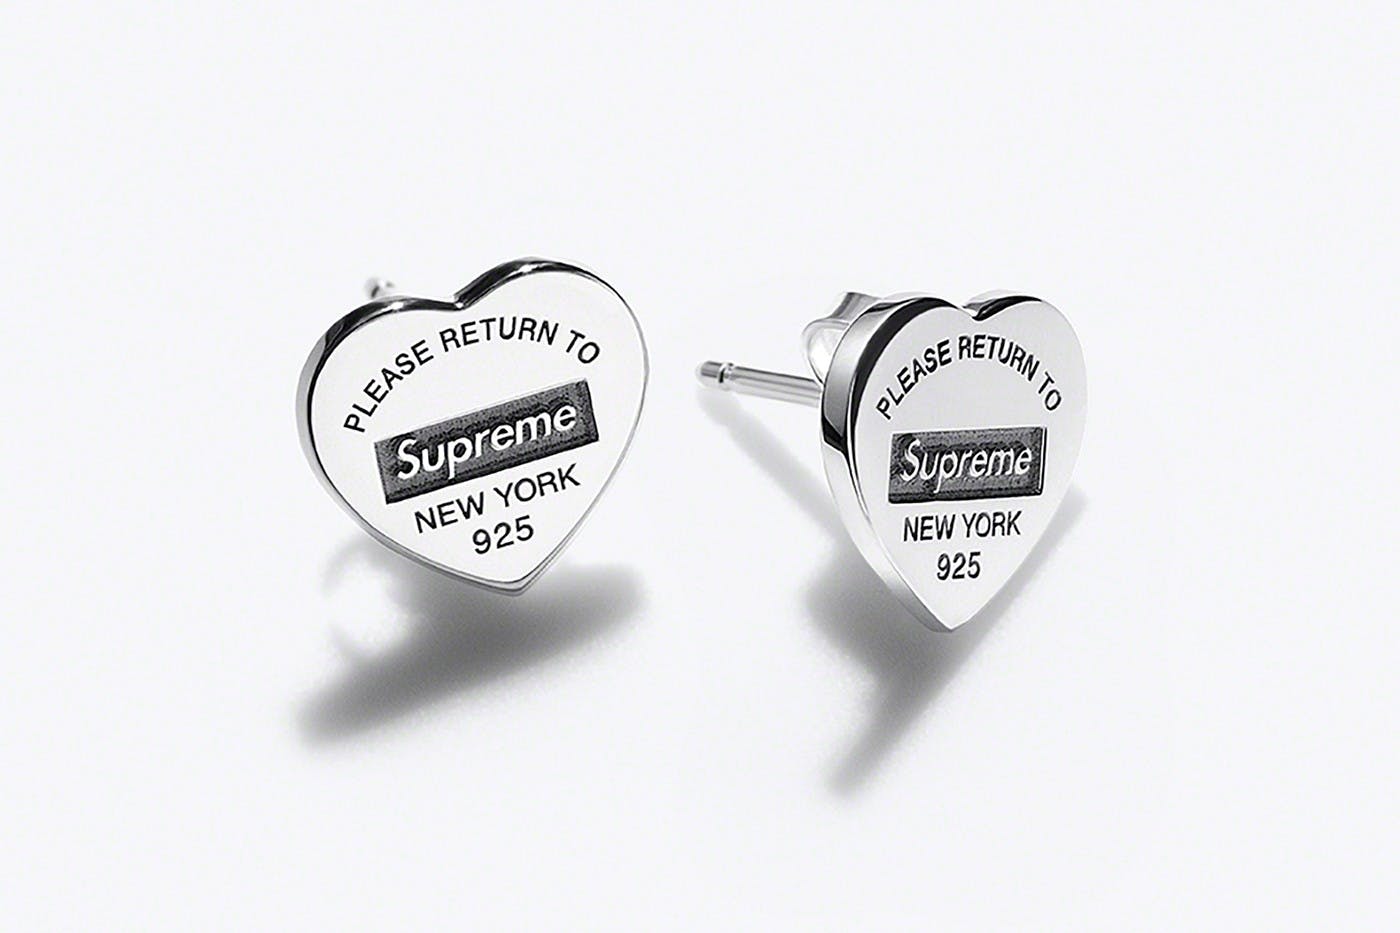 The Supreme x Tiffany & Co Collab is Officially Here | Hybe.com